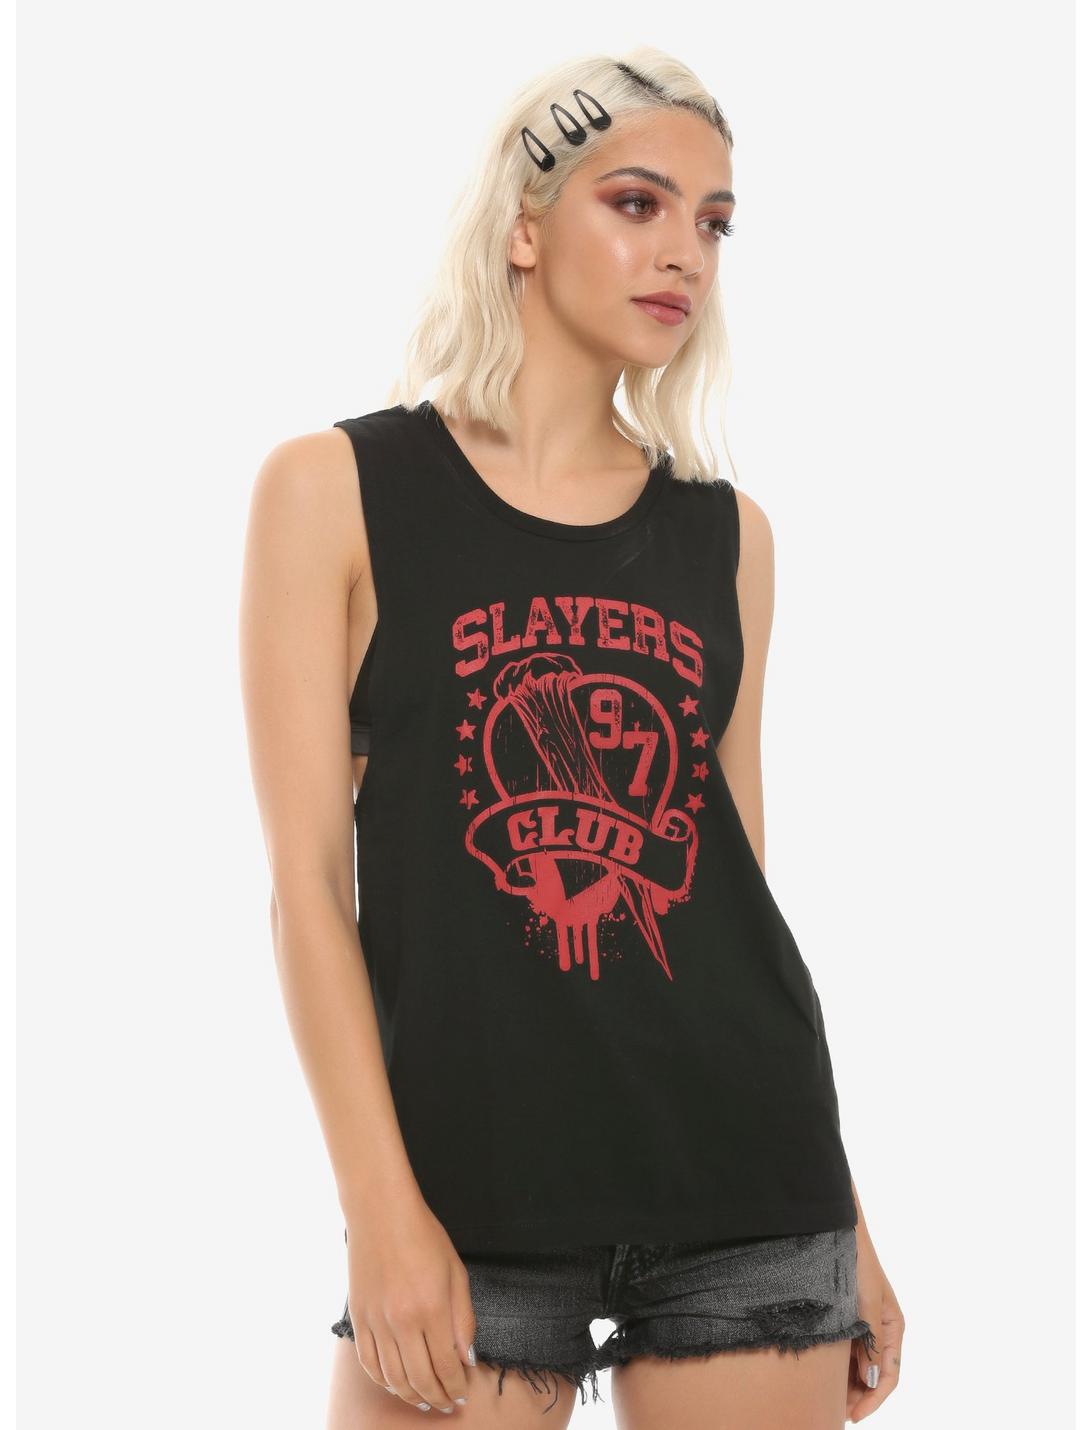 Buffy The Vampire Slayer Slayers Club Girls Muscle Top, RED, hi-res